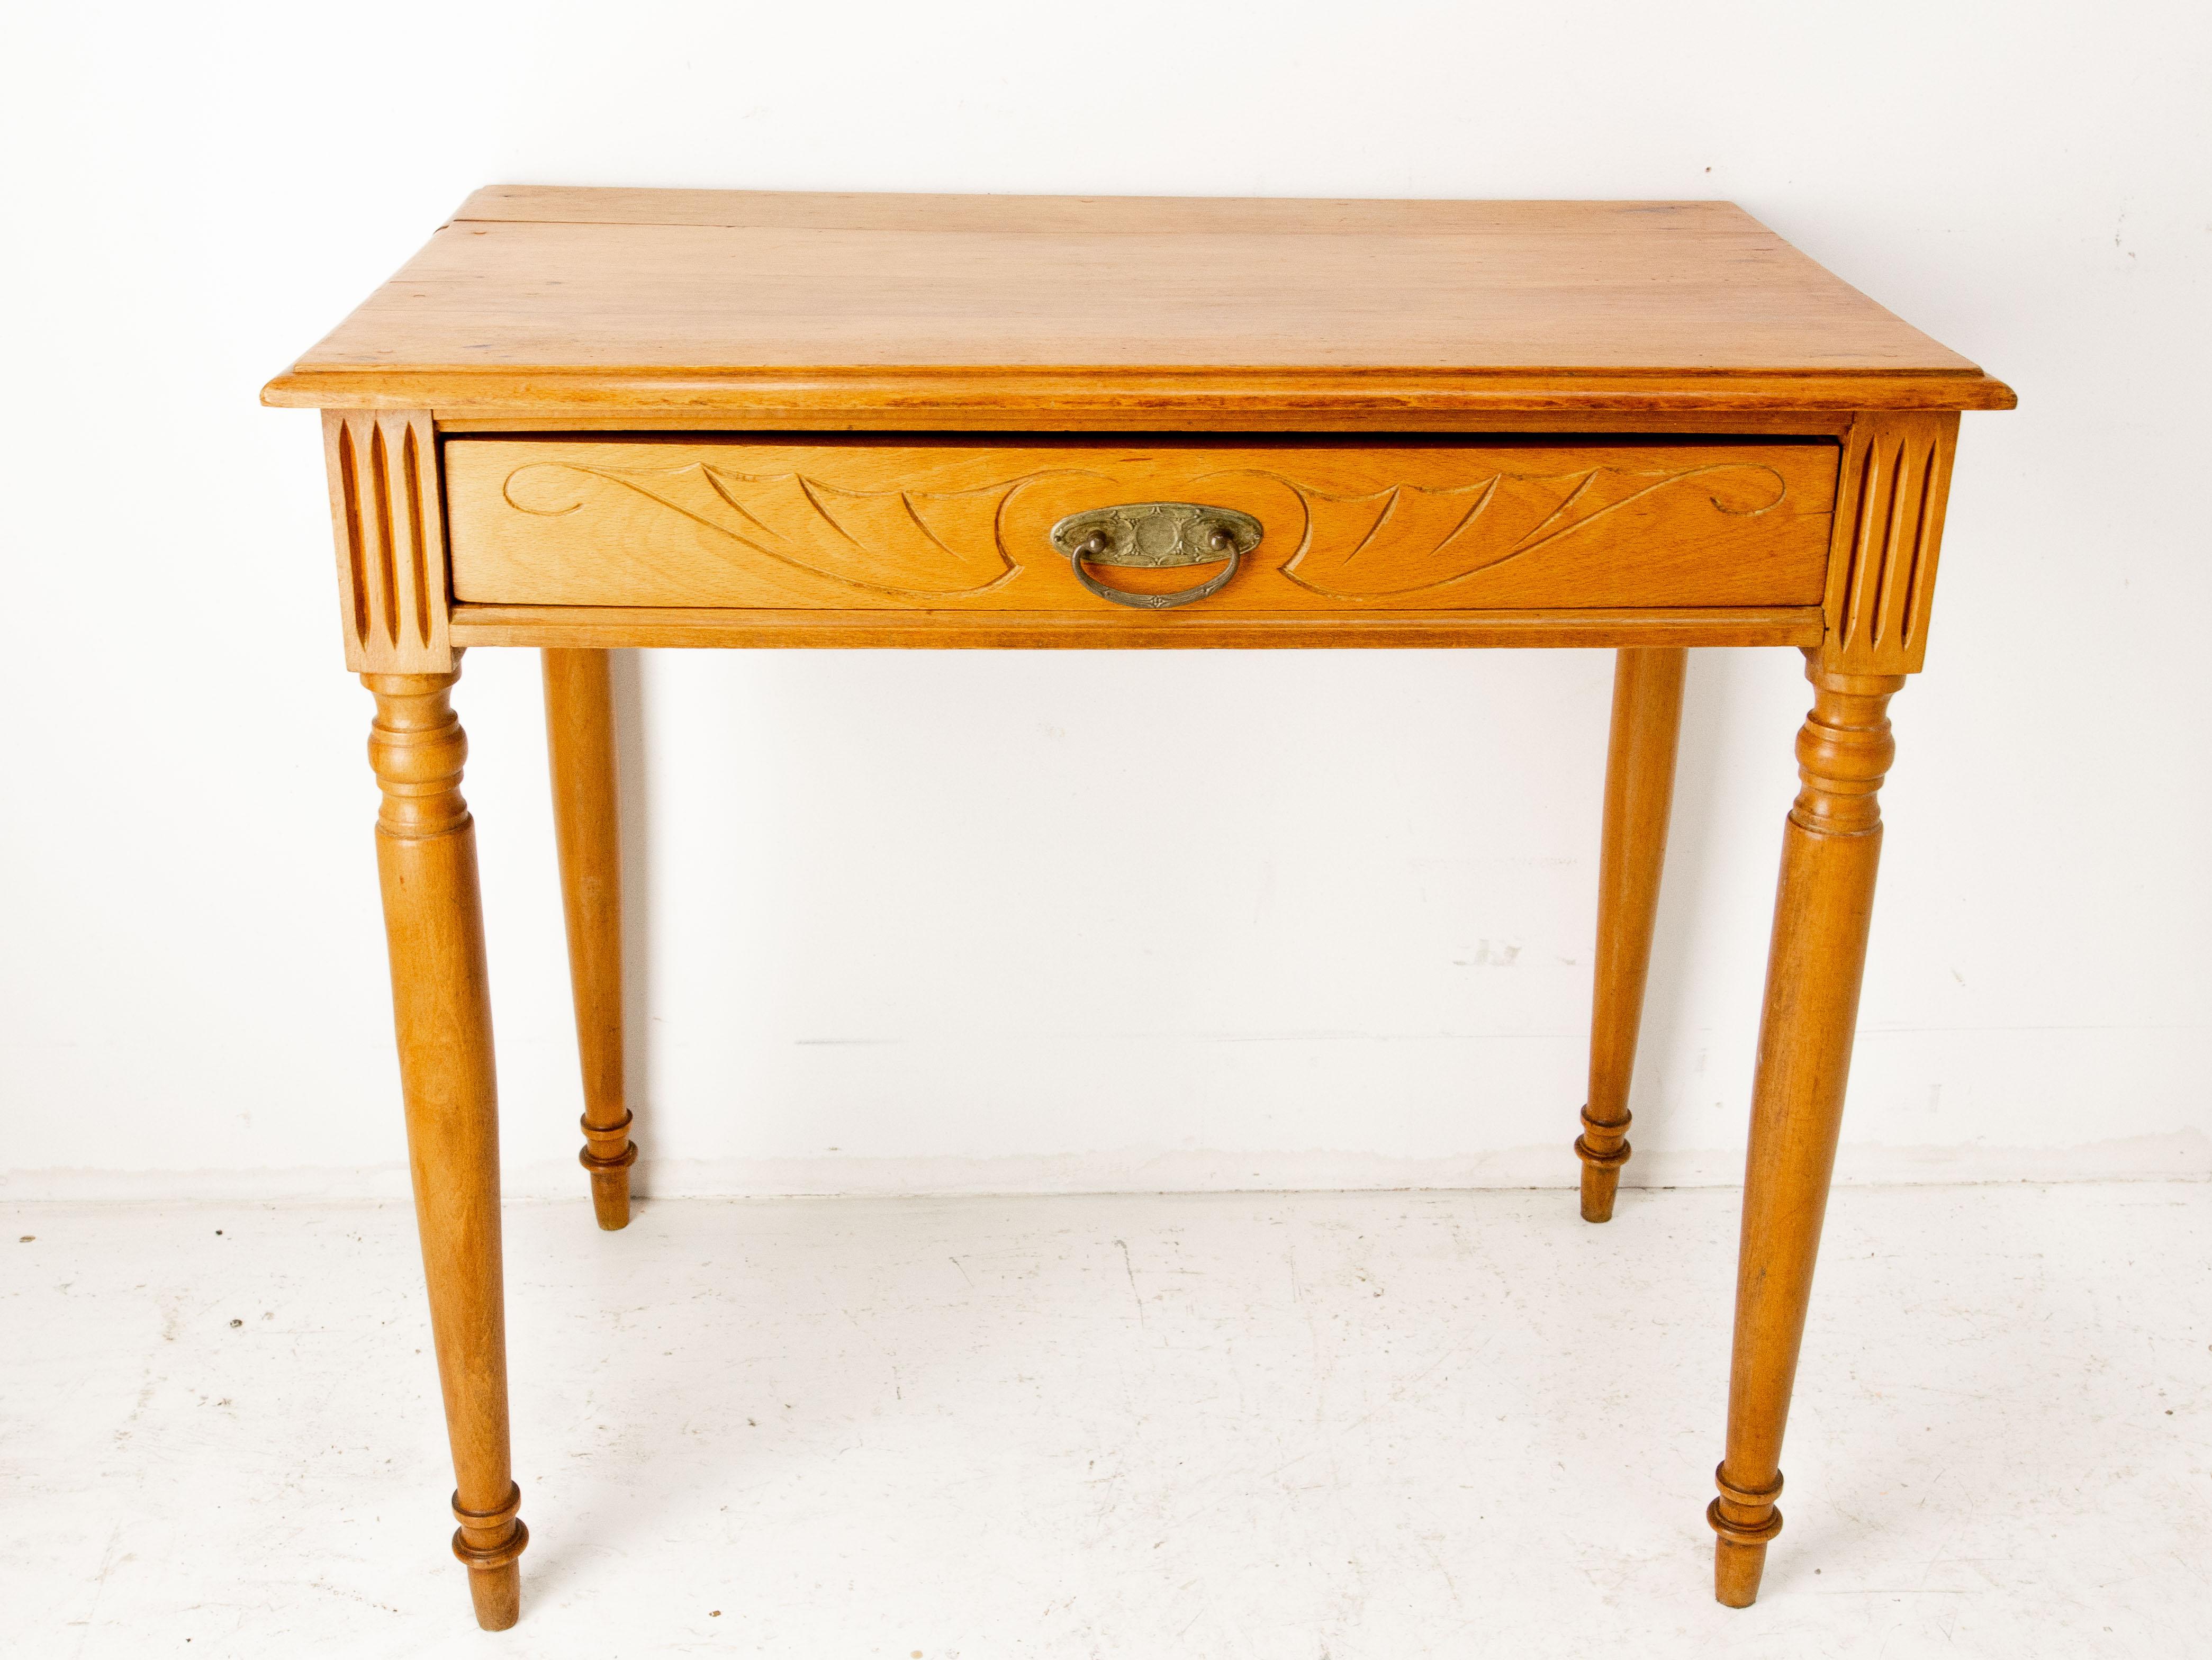 French writing table, little desk or side table, circa 1900.
Made in the art Nouveau period : the carving of the drawer and its handle is typical of the lines of this artistic movement. 
The beech has been tinted in a cherry-wood color, brass